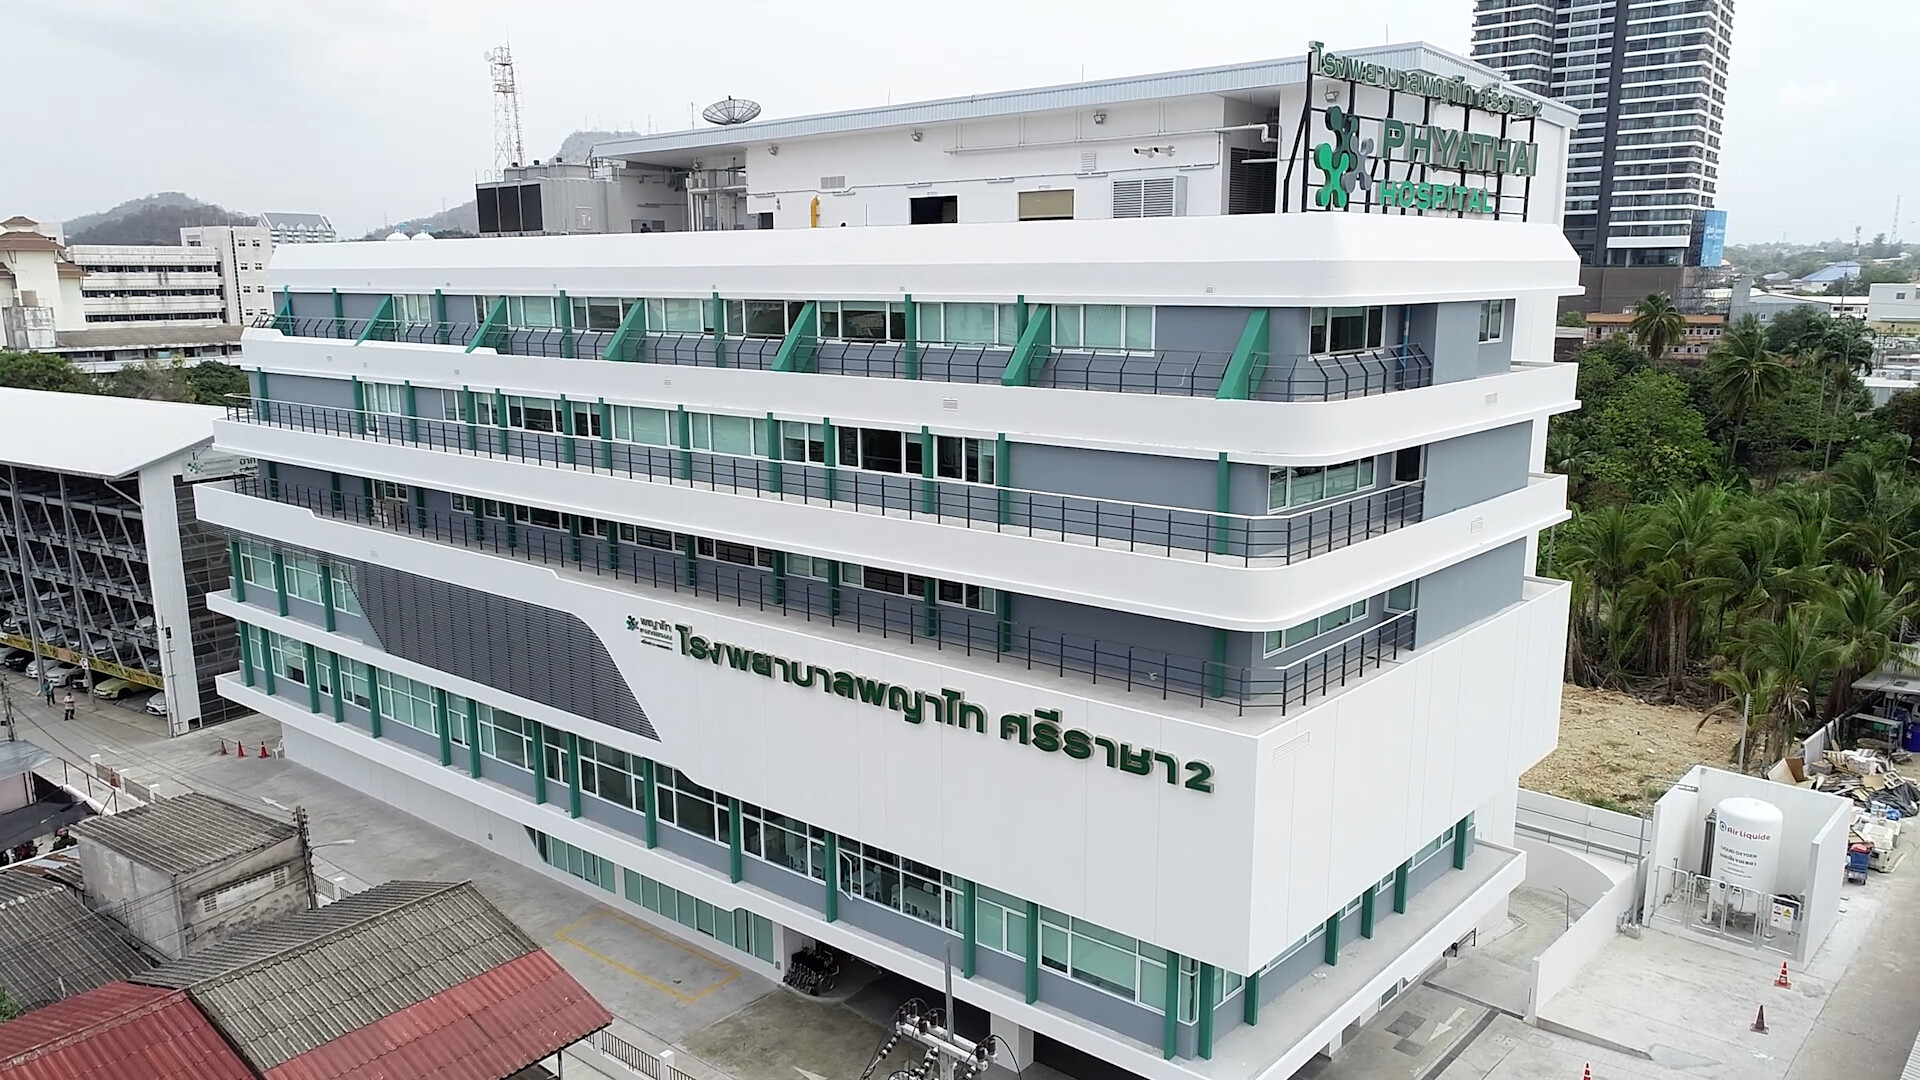 Phyathai-Paolo Hospital Group Expands into EEC Market with New Hospital Launch - Phayathai Sriracha 2 Hospital Leads Thailand in Medical Tourism